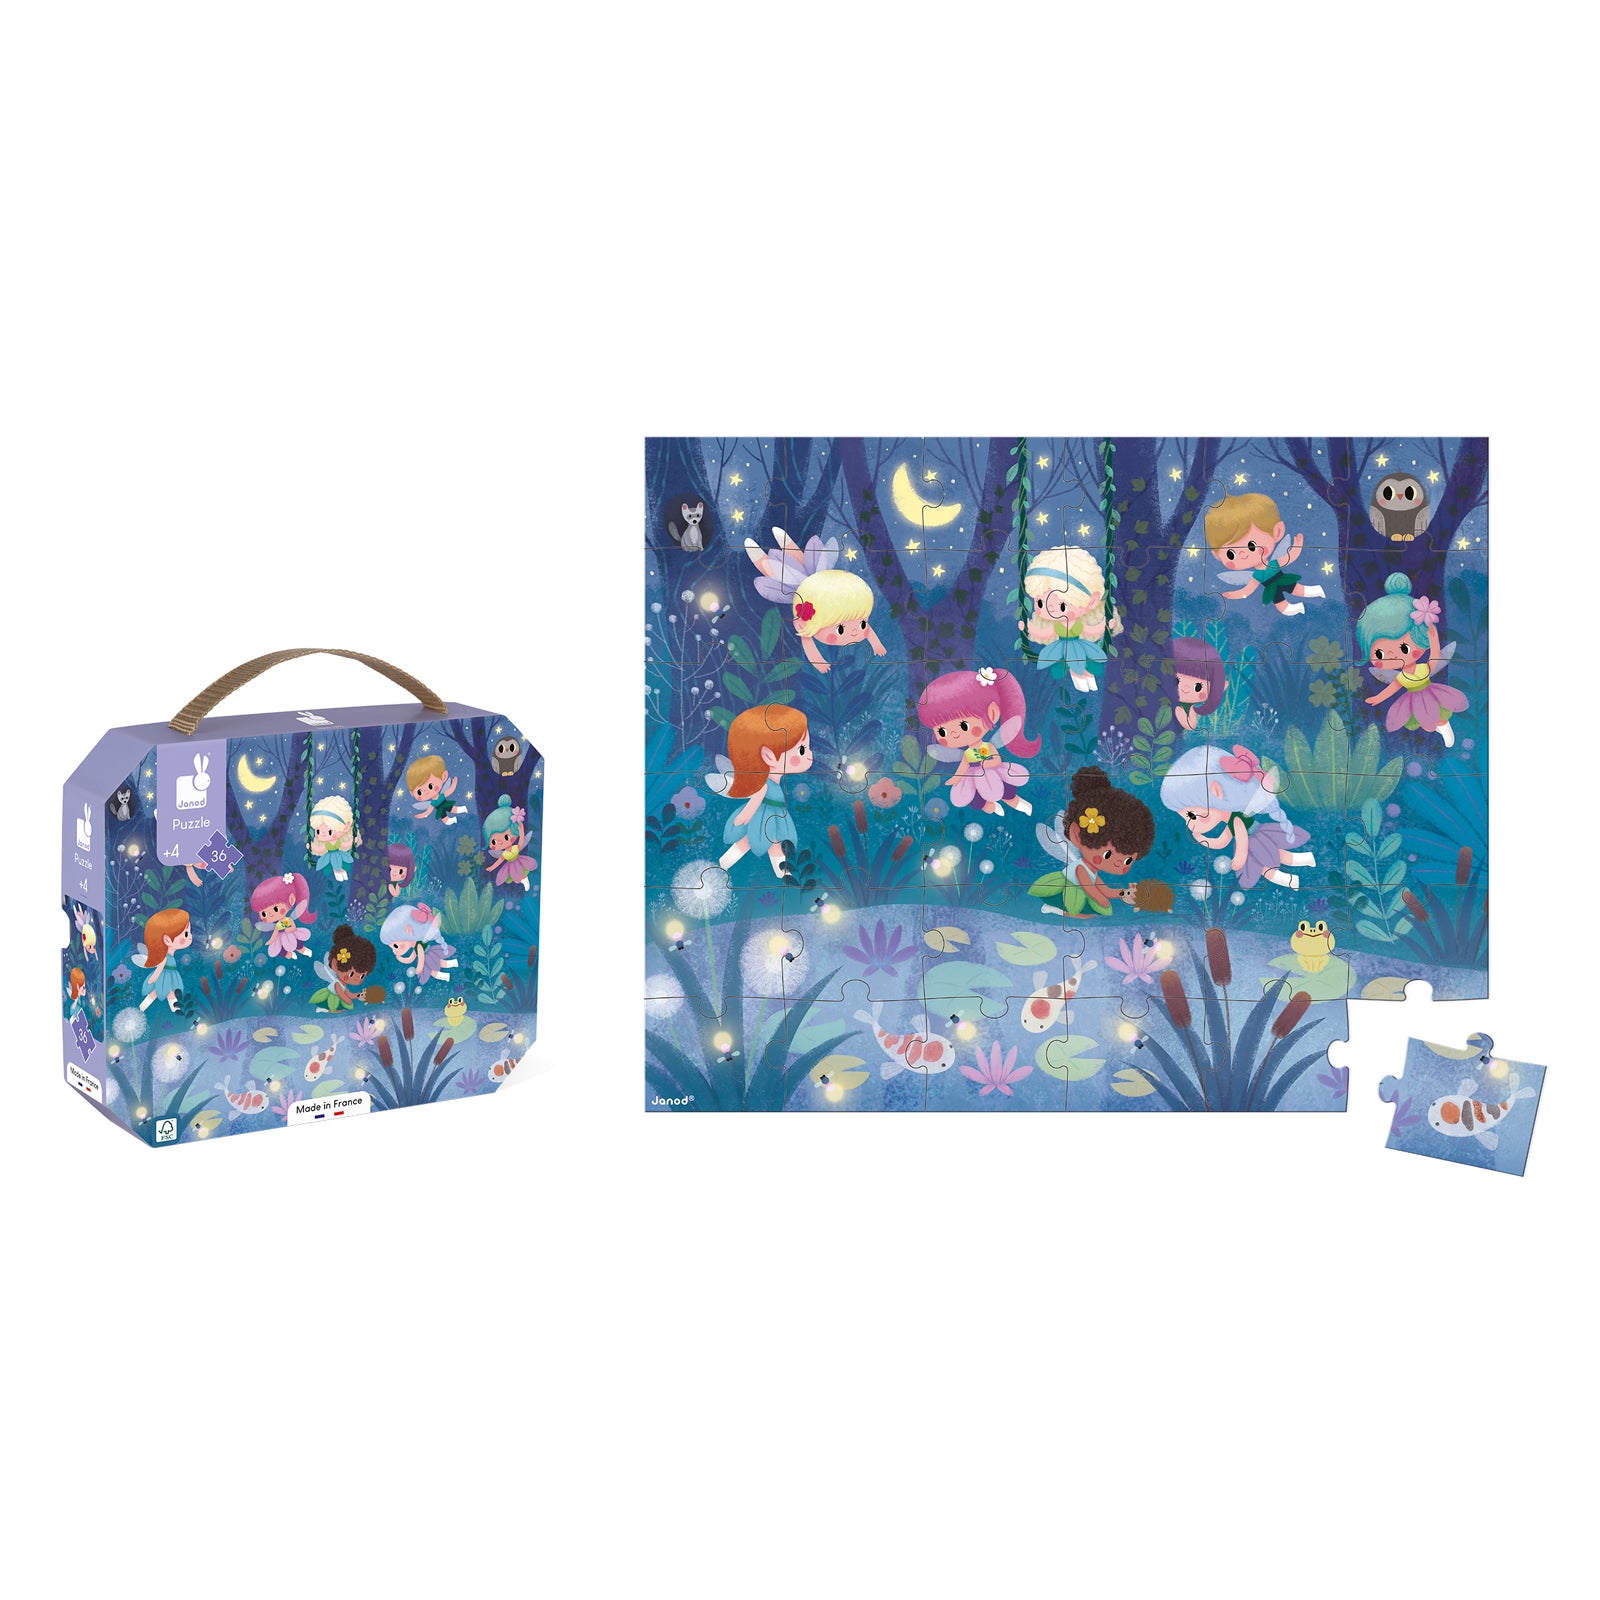 Janod Suitcase Puzzle: Fairies and Waterlilies 36 Pieces